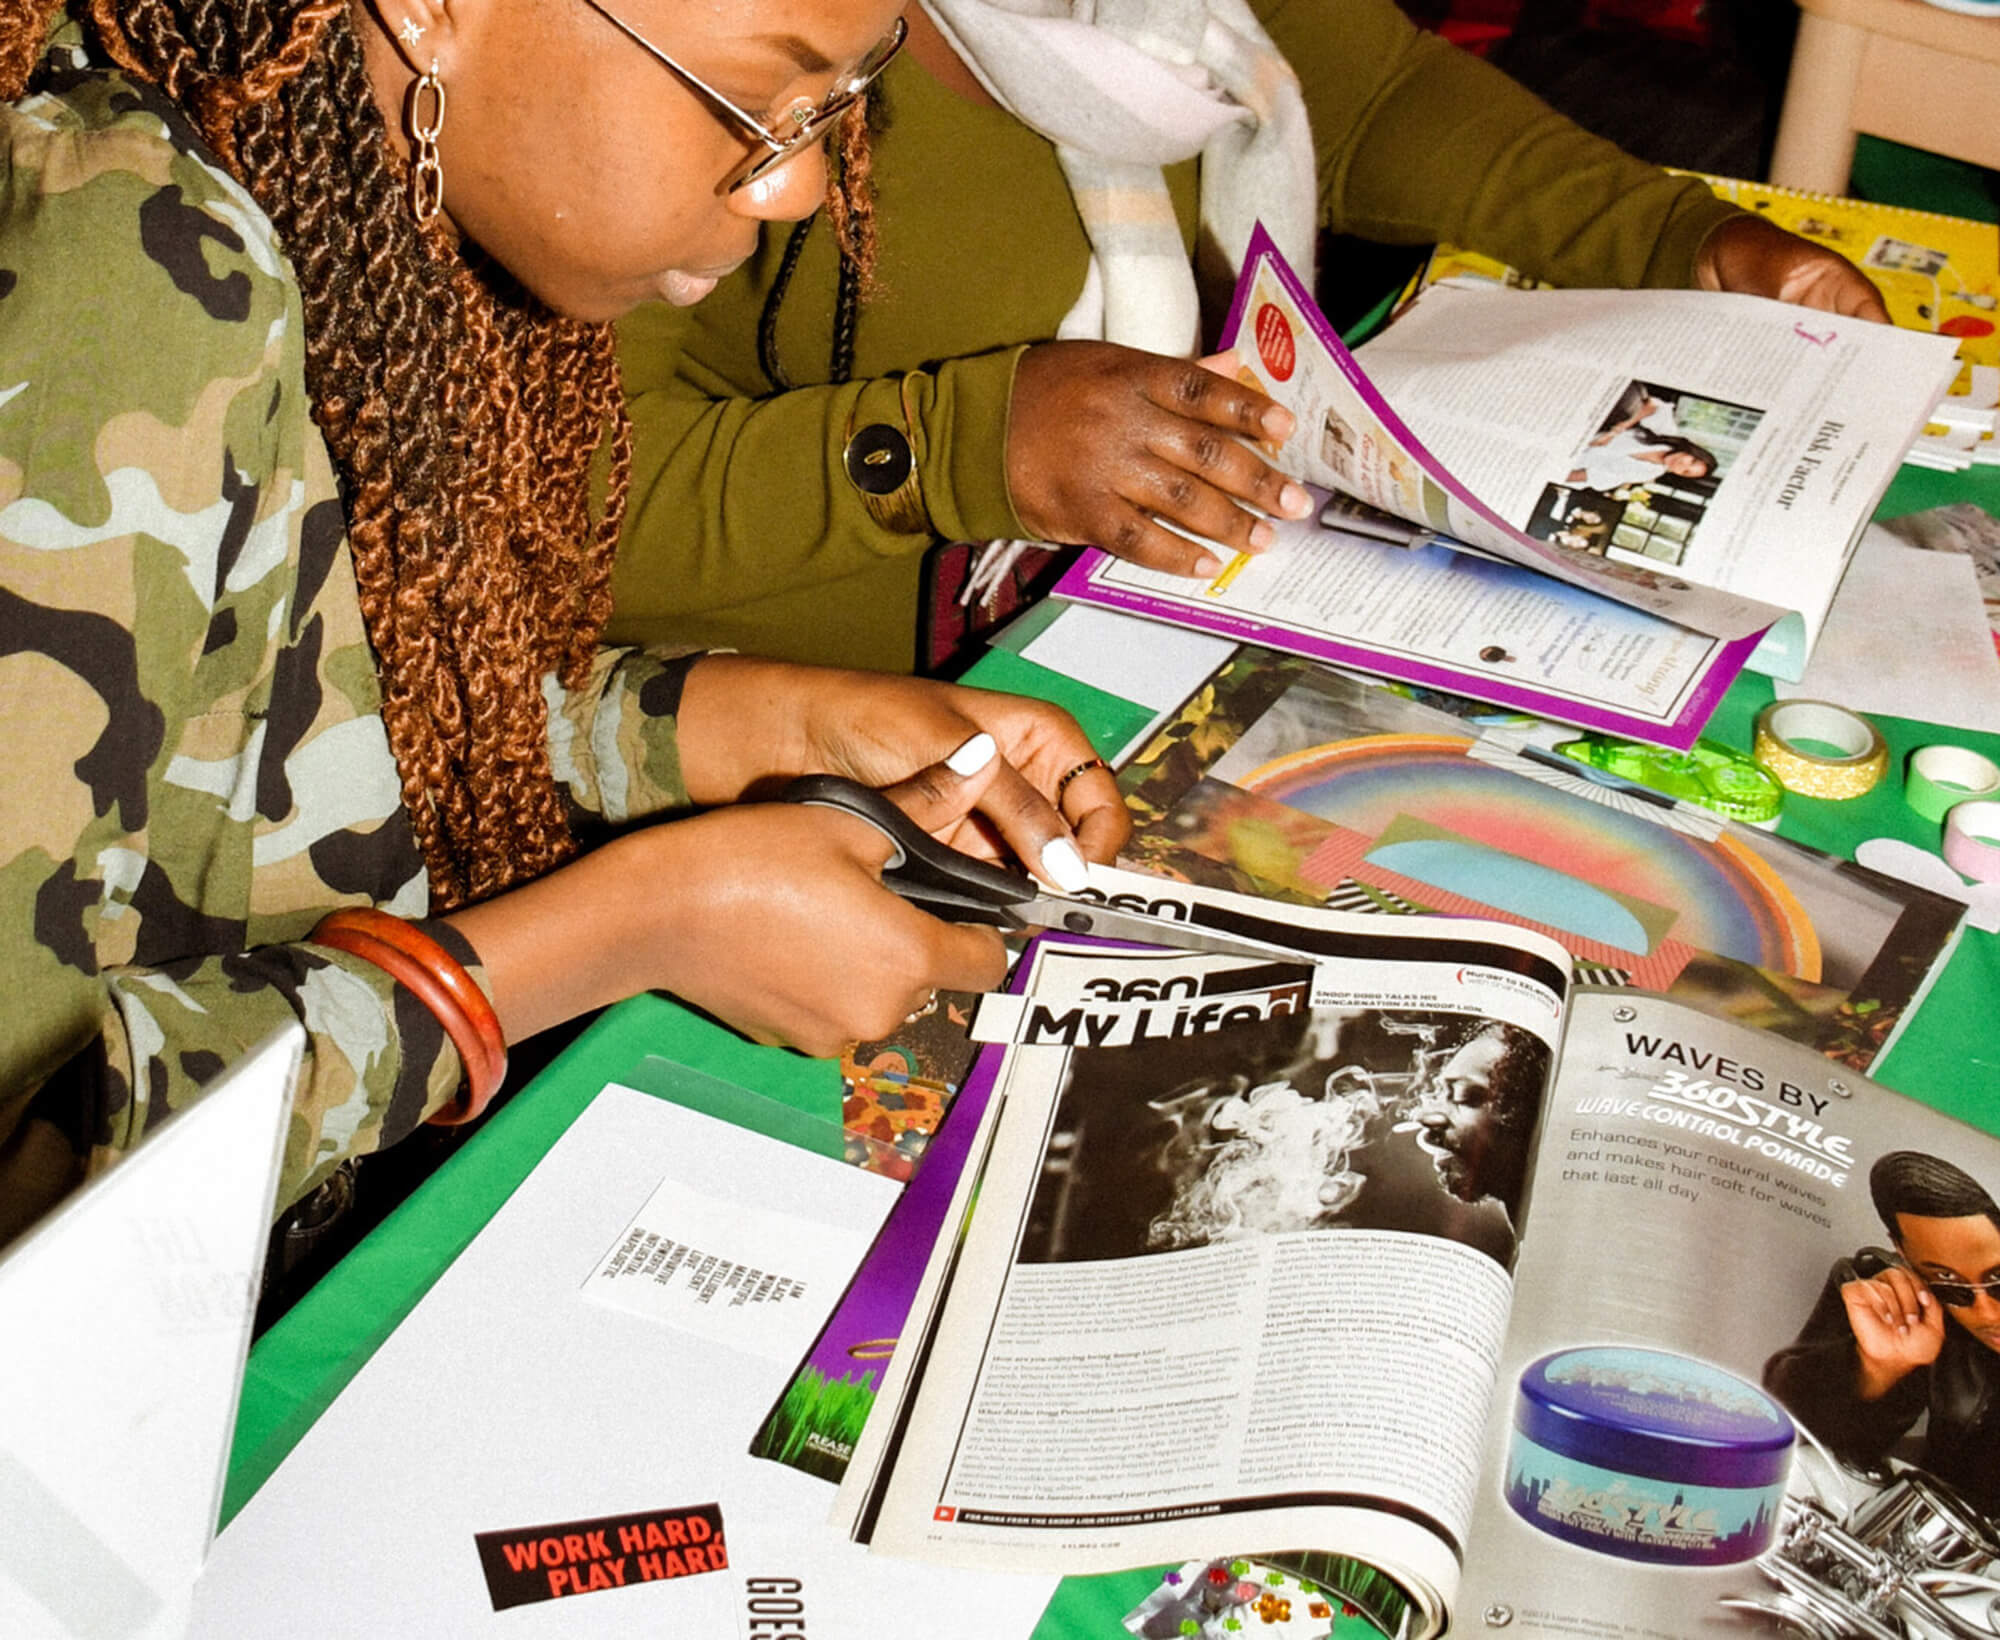 Image of magazines and craft supplies on a table being used to create vision boards. Two people are sitting at the table cutting magazines.